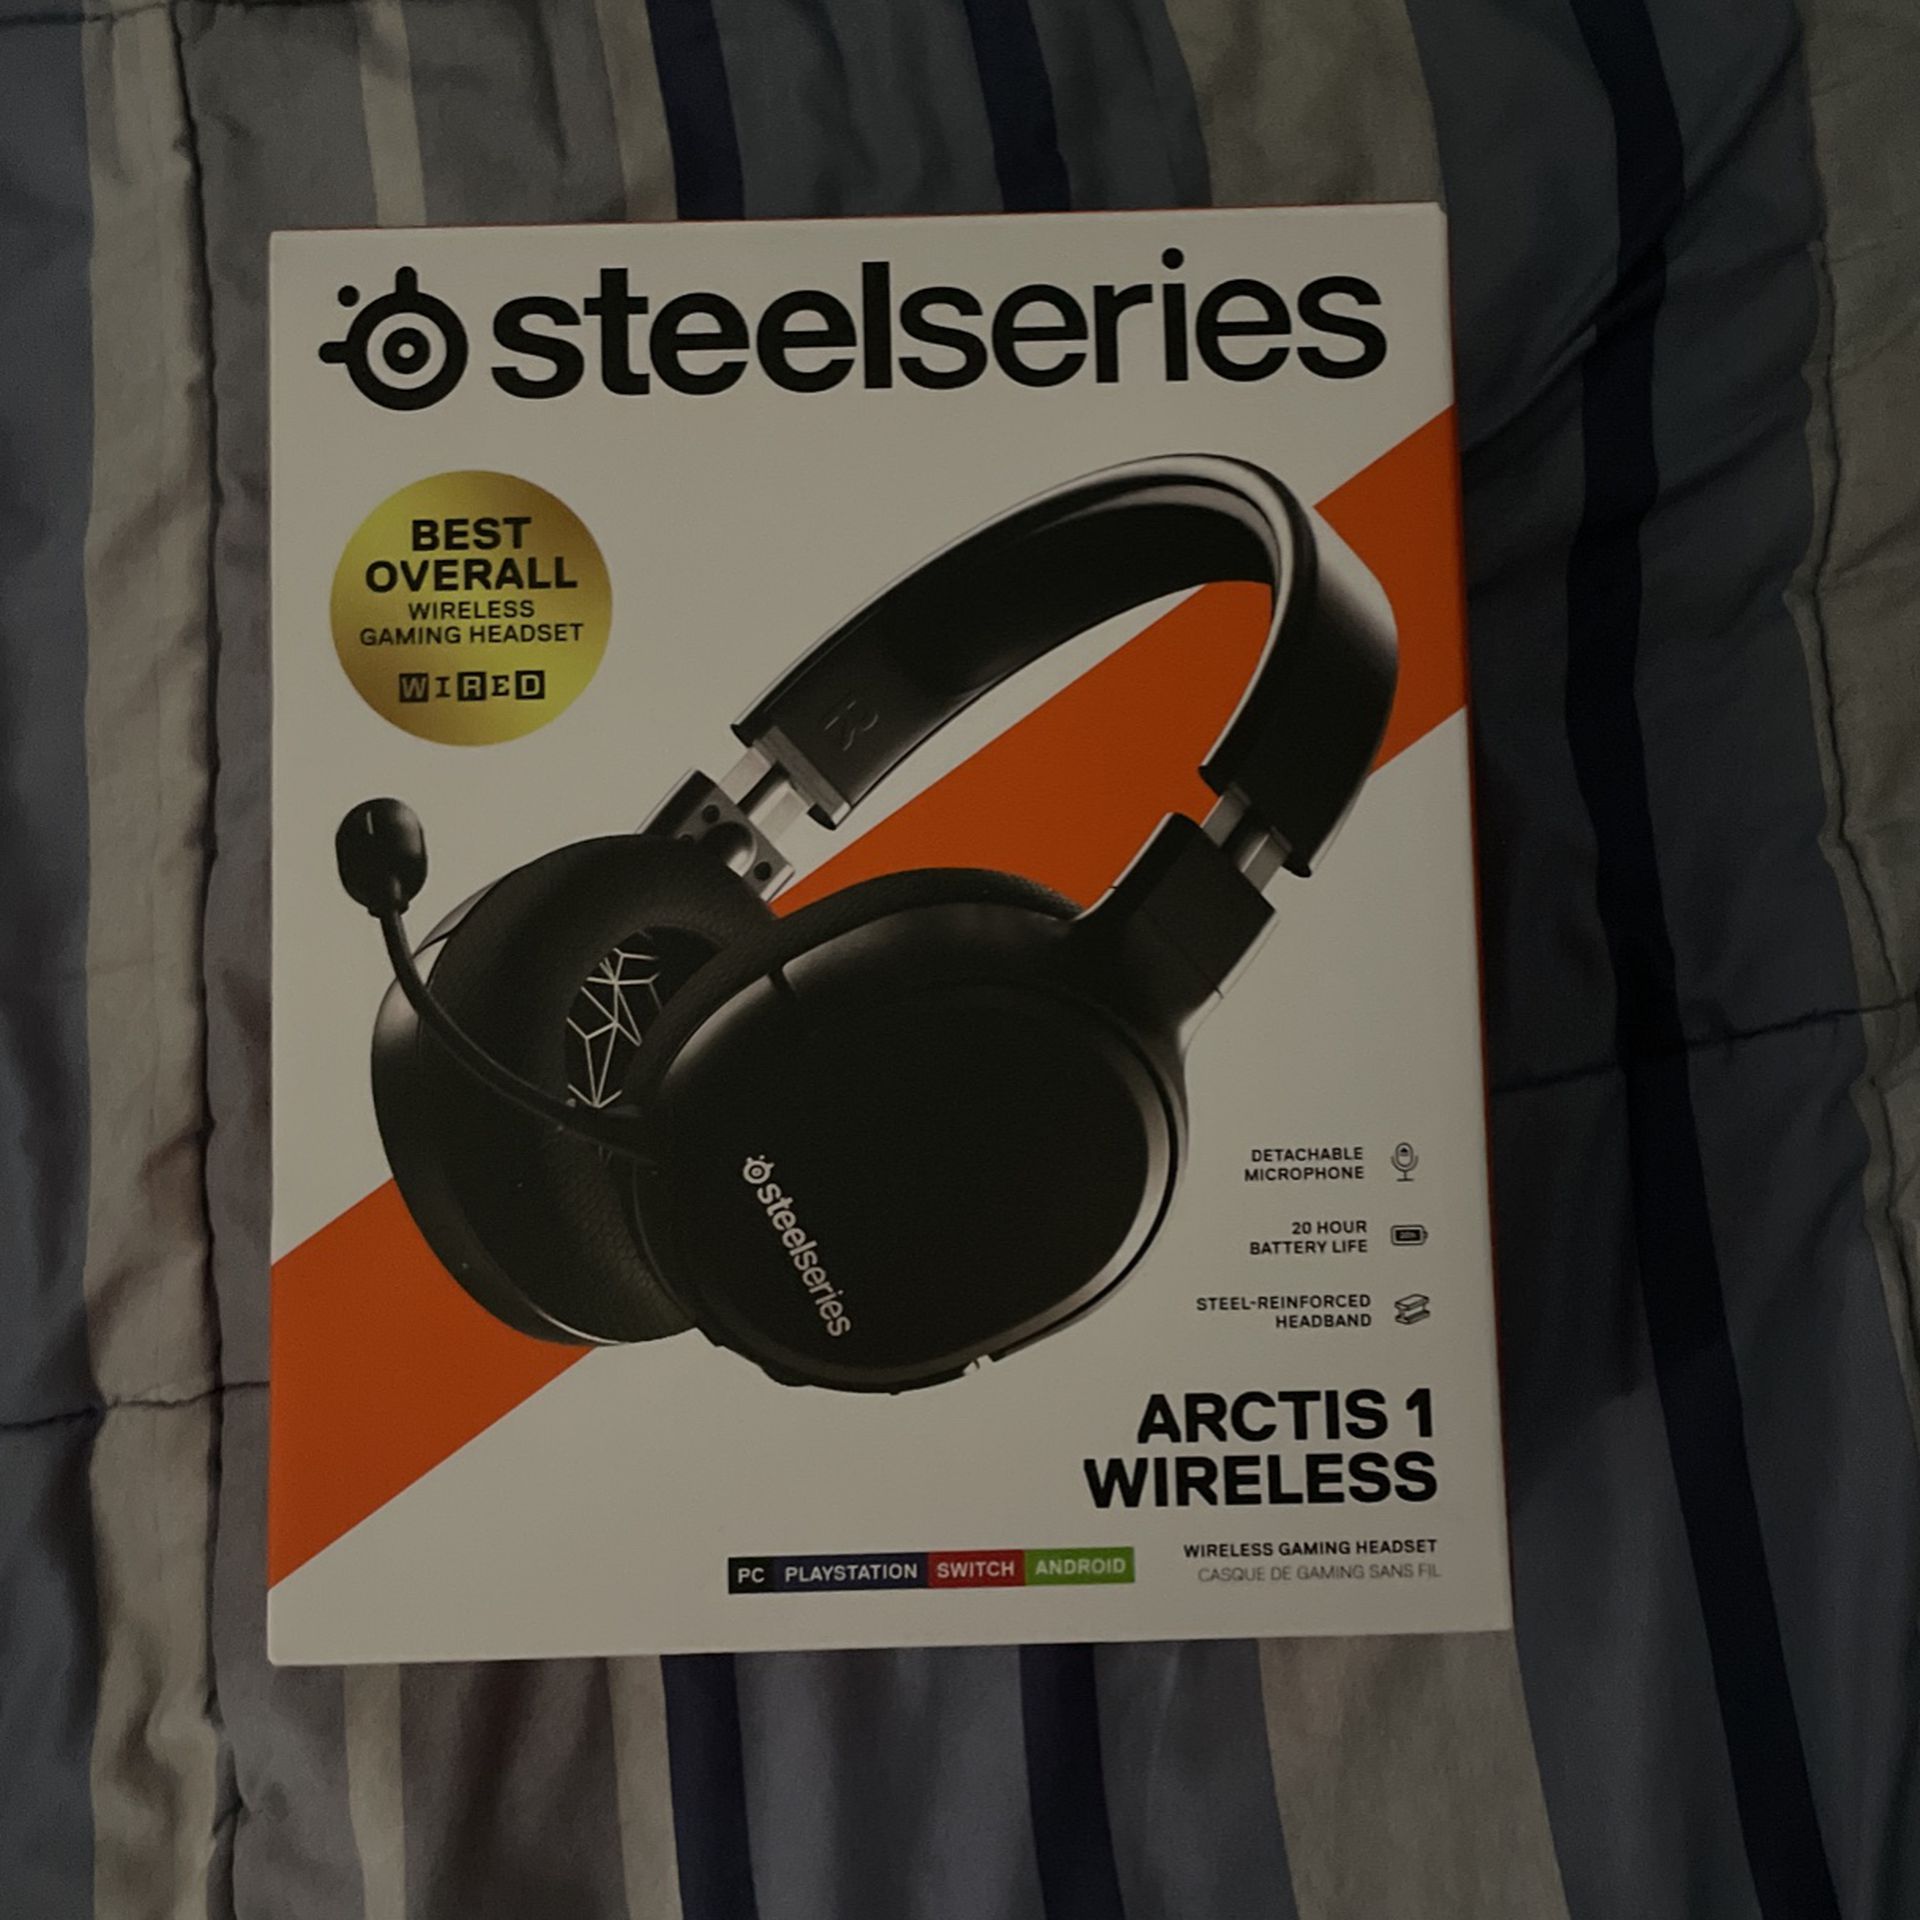 Steelseries Wireless Headset and Mic